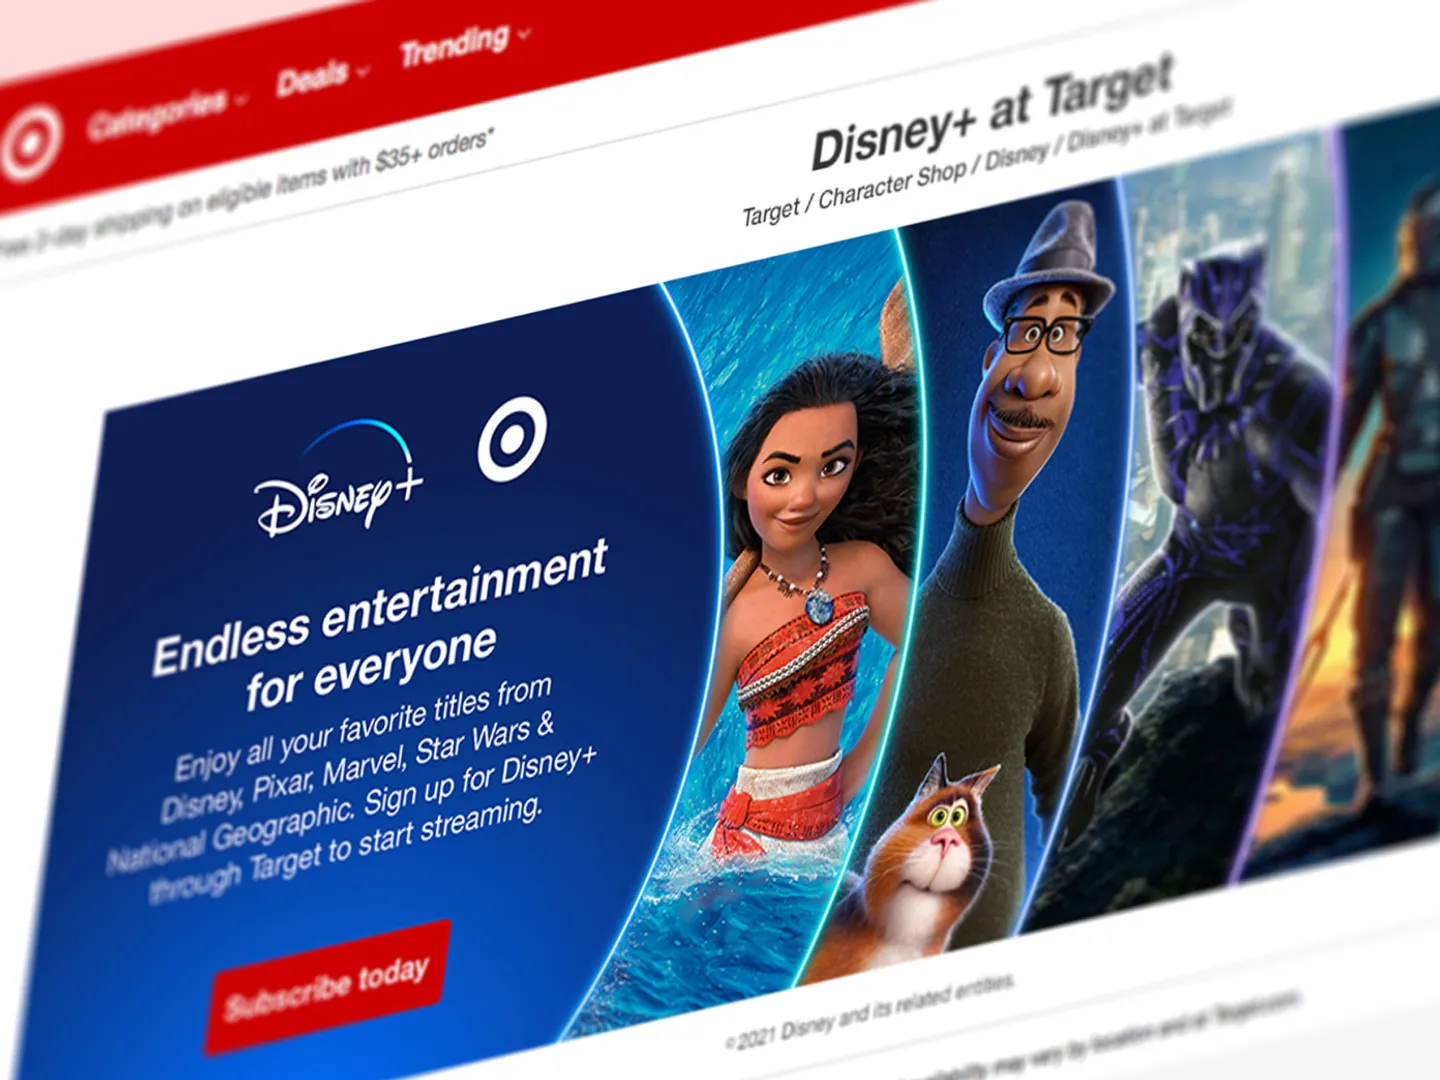 Close up of a web page design showing Target's partnership with Disney+